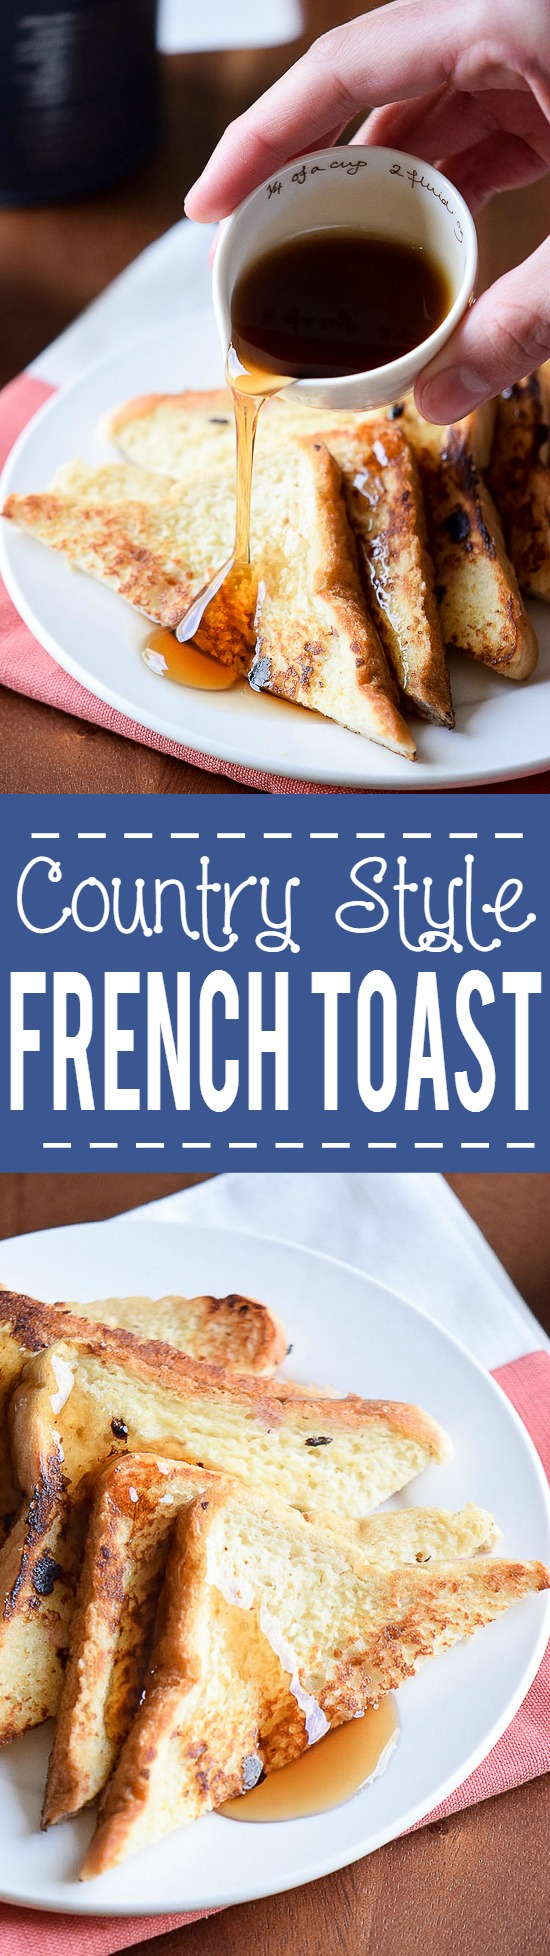 Country French Toast recipe - Classic Country French Toast recipe with simple ingredients is quick and easy to whip up and makes a perfect, yummy breakfast. Top with butter, maple syrup, whipped cream, or berries. Love french toast for an easy breakfast recipe that kids will love!